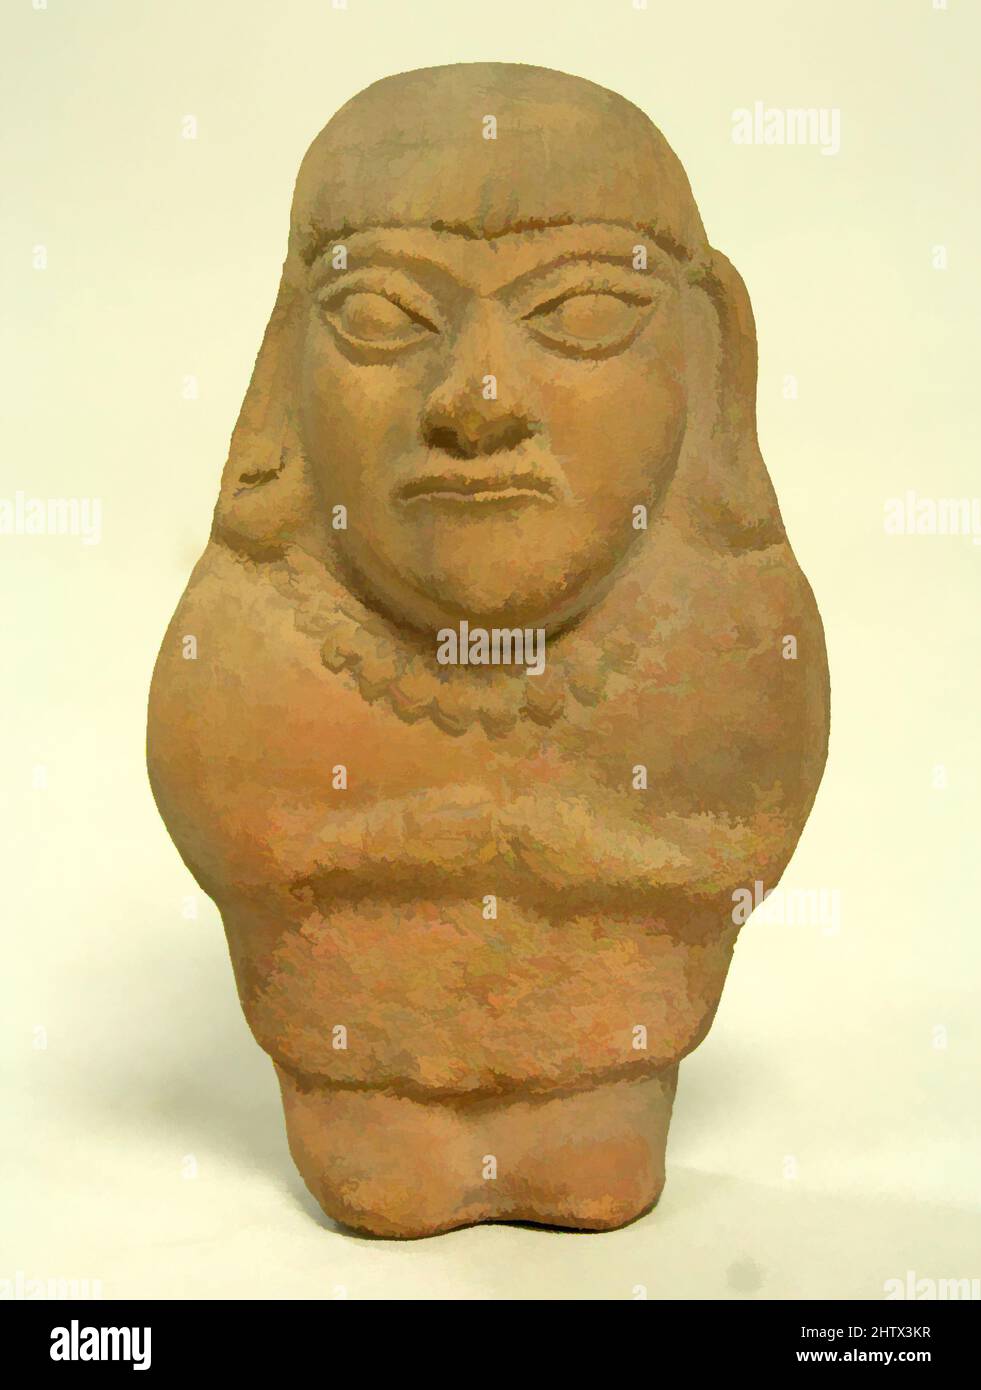 Art inspired by Standing Ceramic Figure, 3rd–5th century, Peru, Moche, Ceramic, H x W: 5 1/4 x 3in. (13.3 x 7.6cm), Ceramics-Sculpture, Classic works modernized by Artotop with a splash of modernity. Shapes, color and value, eye-catching visual impact on art. Emotions through freedom of artworks in a contemporary way. A timeless message pursuing a wildly creative new direction. Artists turning to the digital medium and creating the Artotop NFT Stock Photo